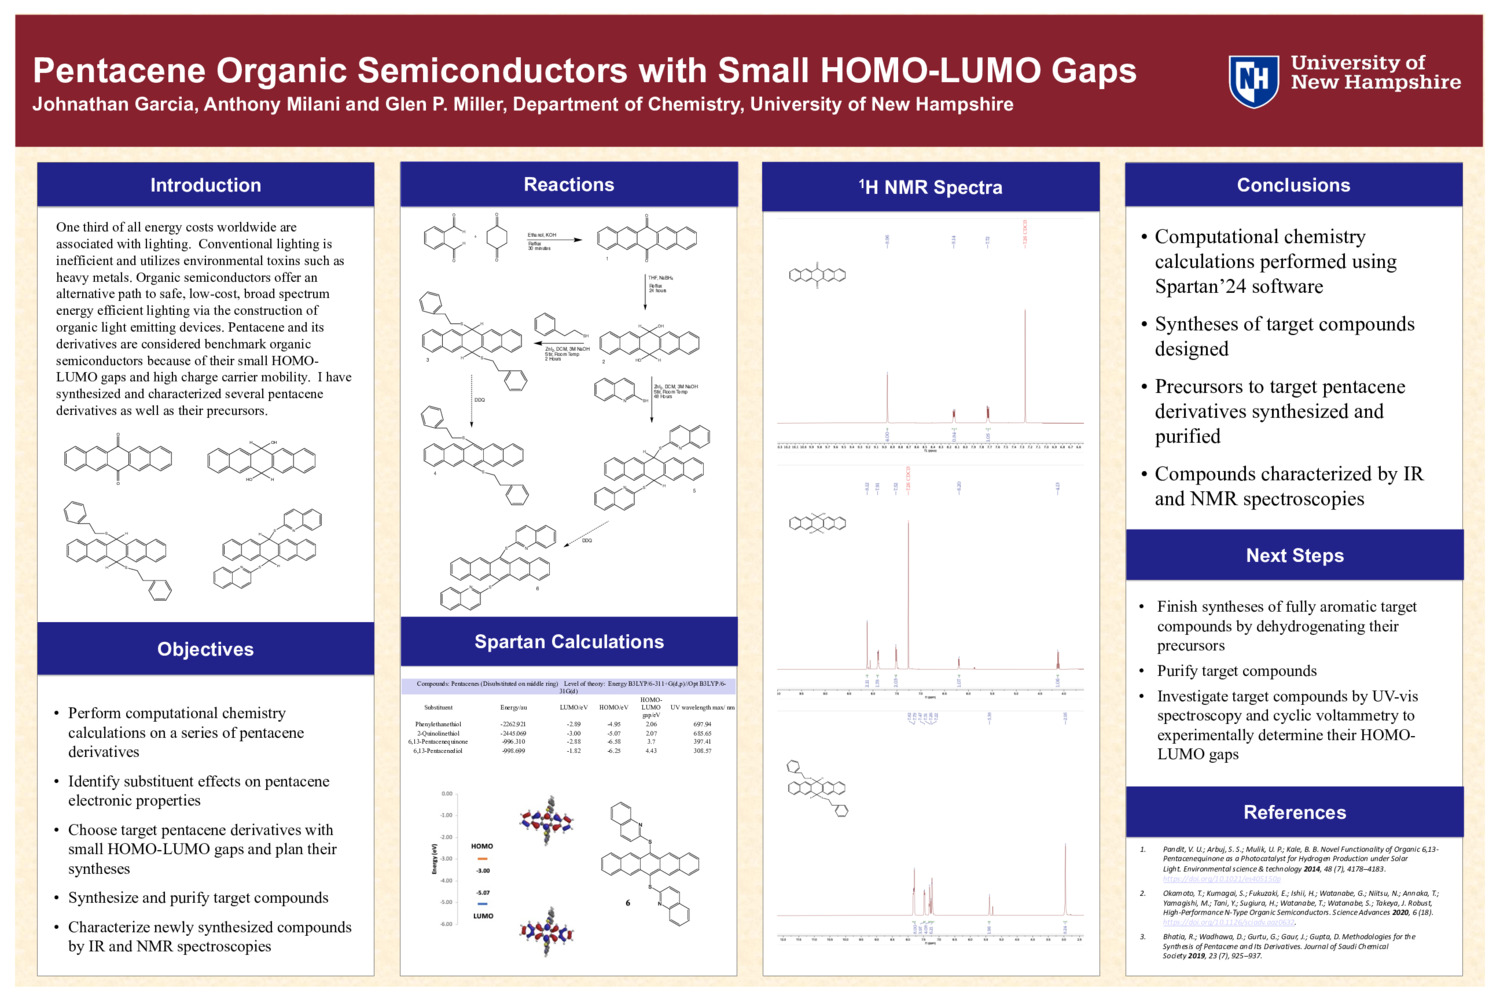 Pentacene Organic Semiconductors With Small Homo-Lumo Gaps by jsg1053